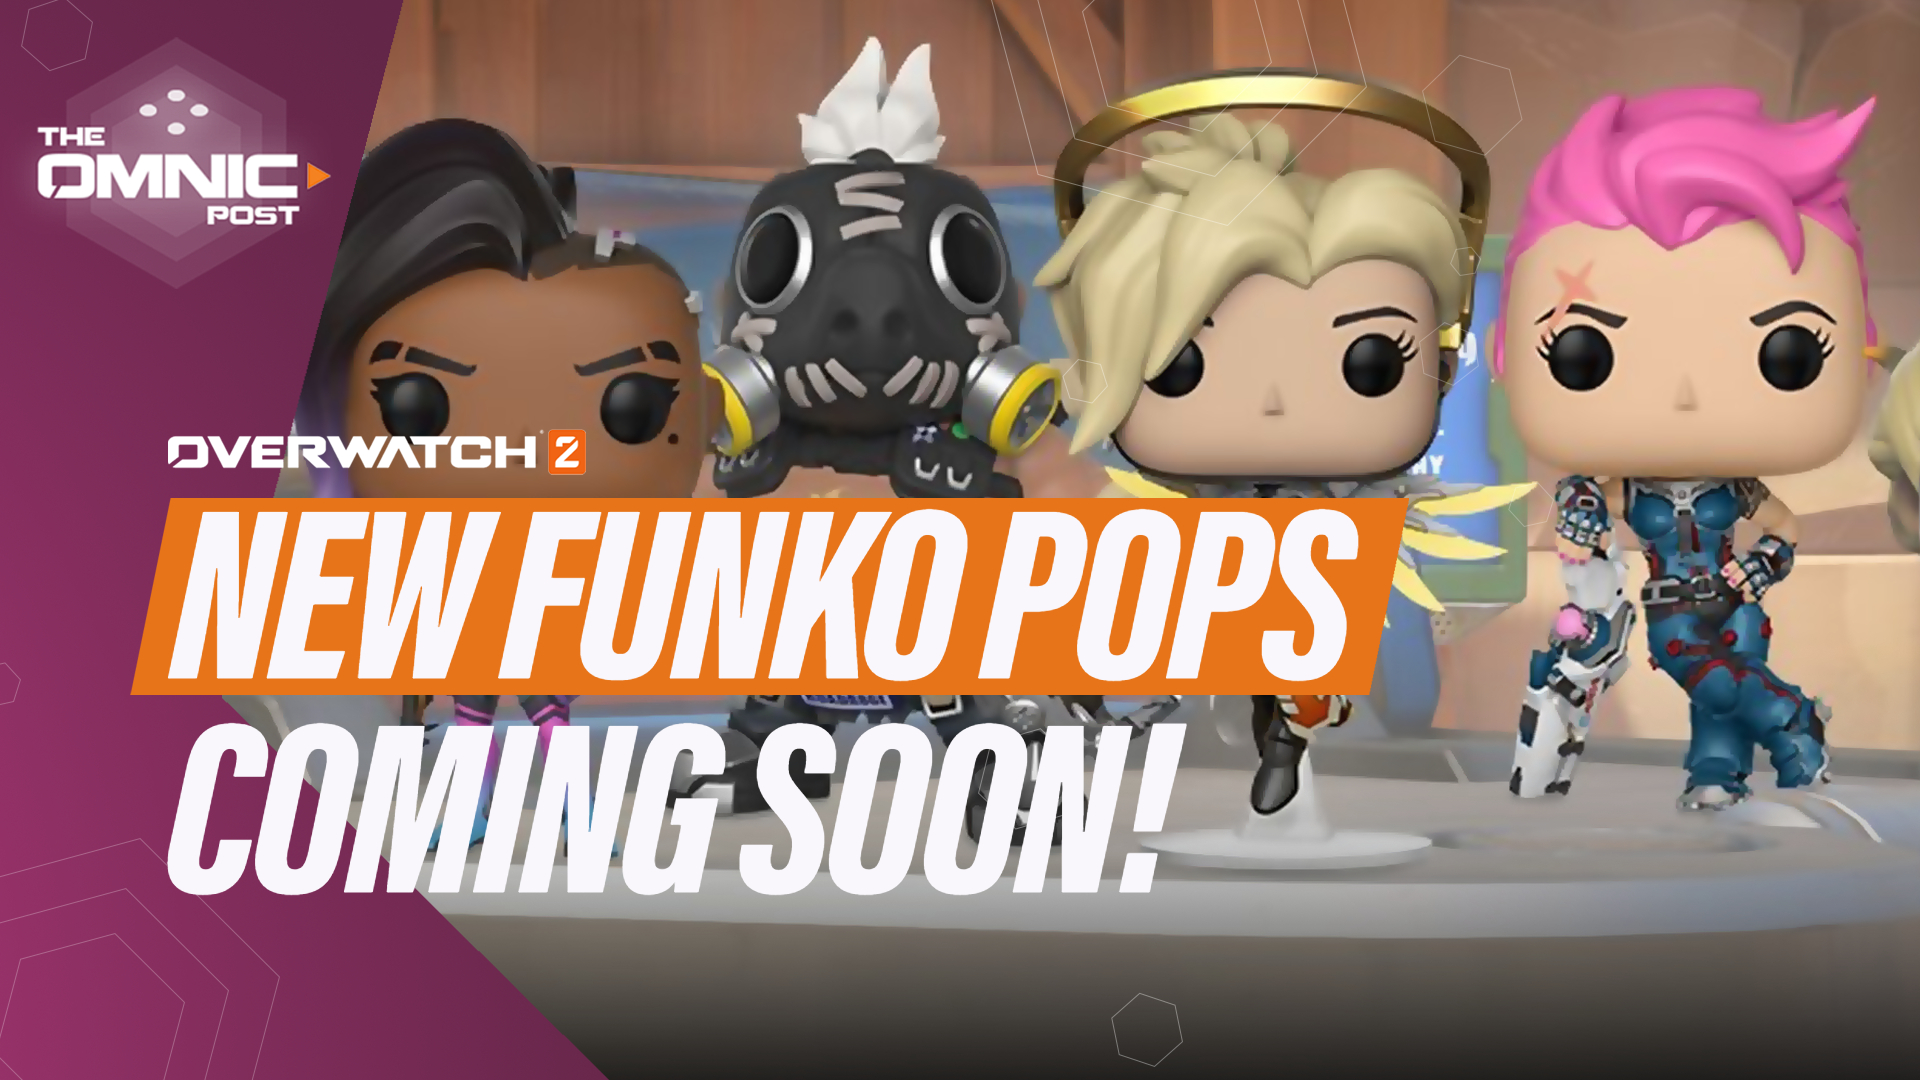 The Omnic Post on Twitter: "According to some sources, a new series of Overwatch 2 Funko Pops should be announced soon. The new includes versions of Reaper, Lucio, and Cassidy.